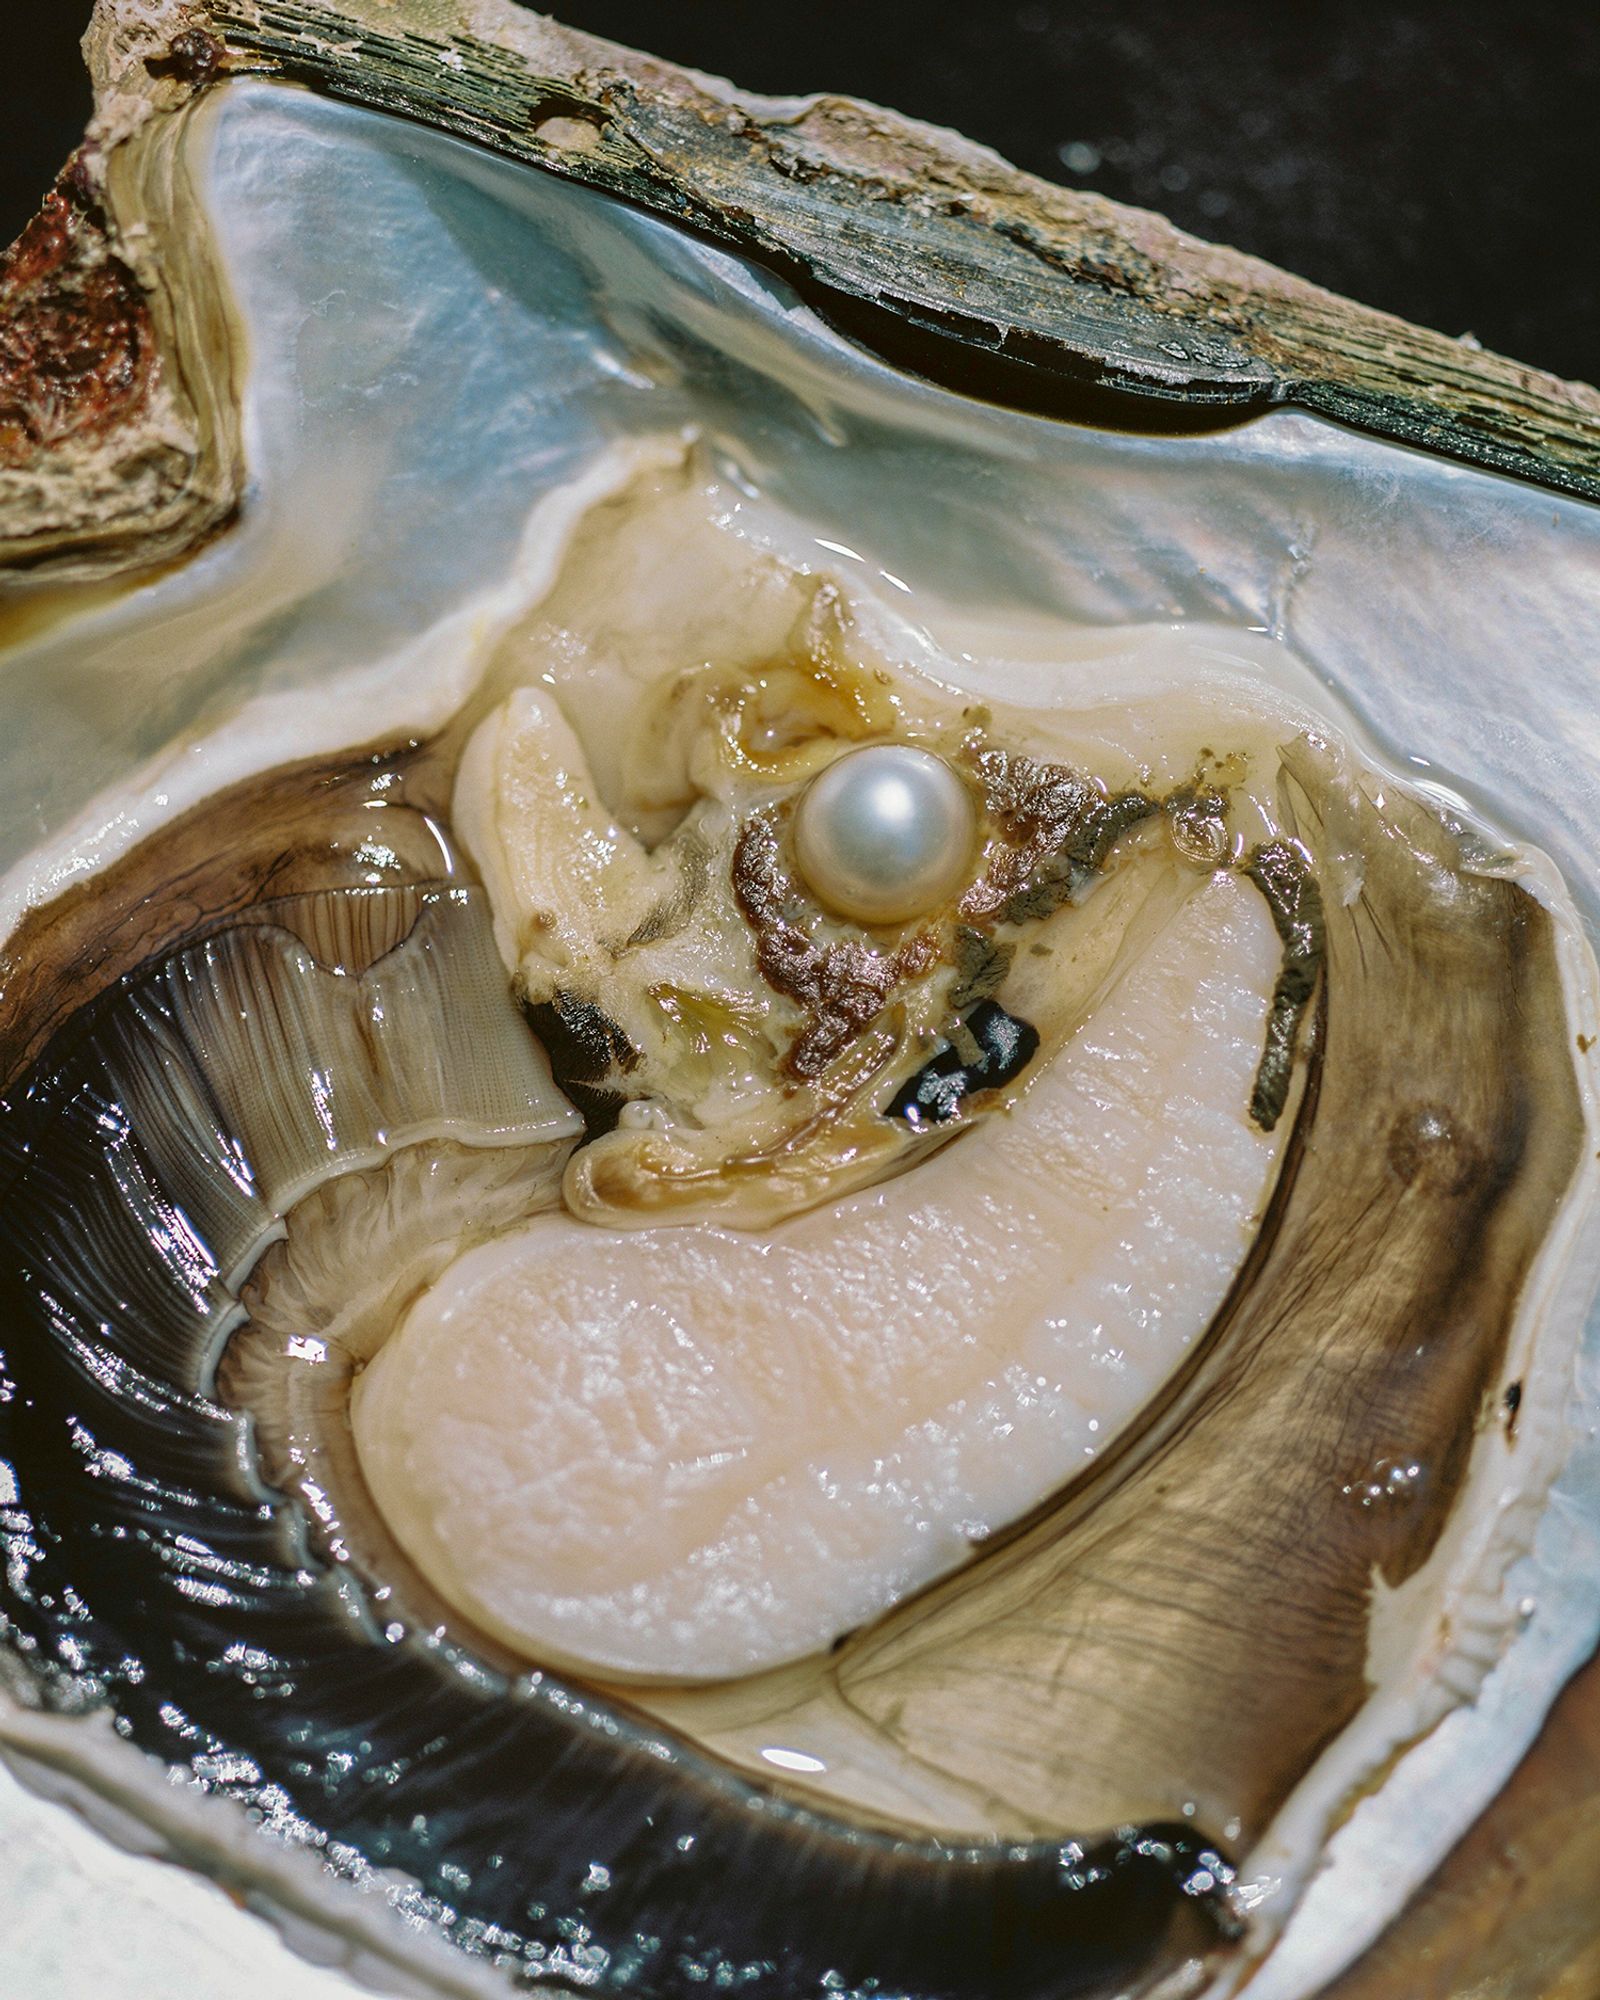 © Rita Puig-Serra Costa - Image from the Anatomy of an oyster photography project